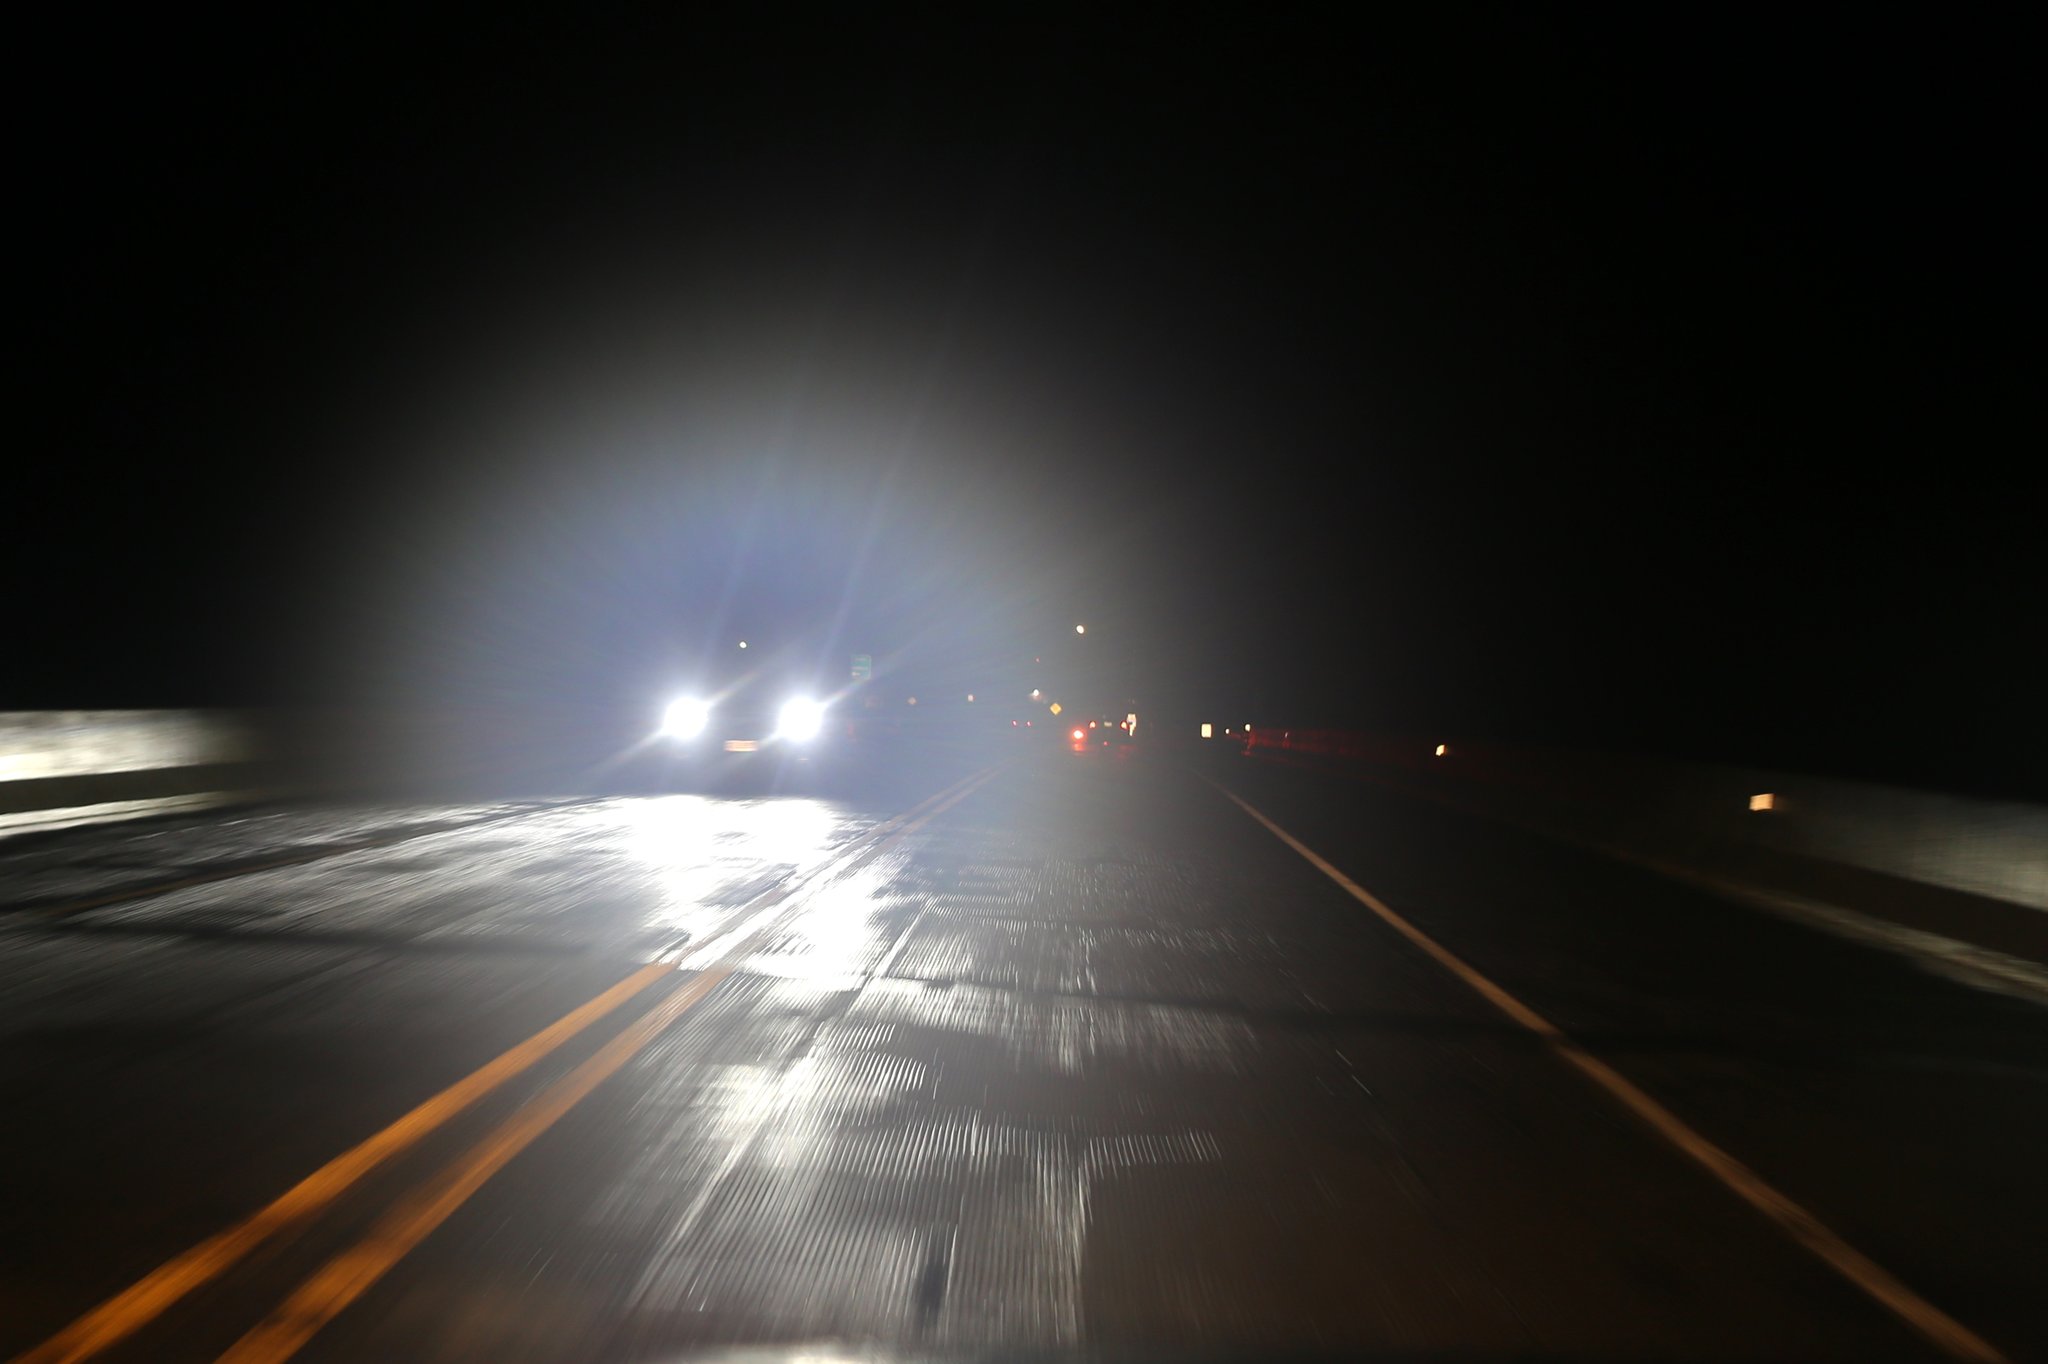 NIGHTTIME CAR DRIVING IS DANGEROUS FOR THESE 4 REASONS